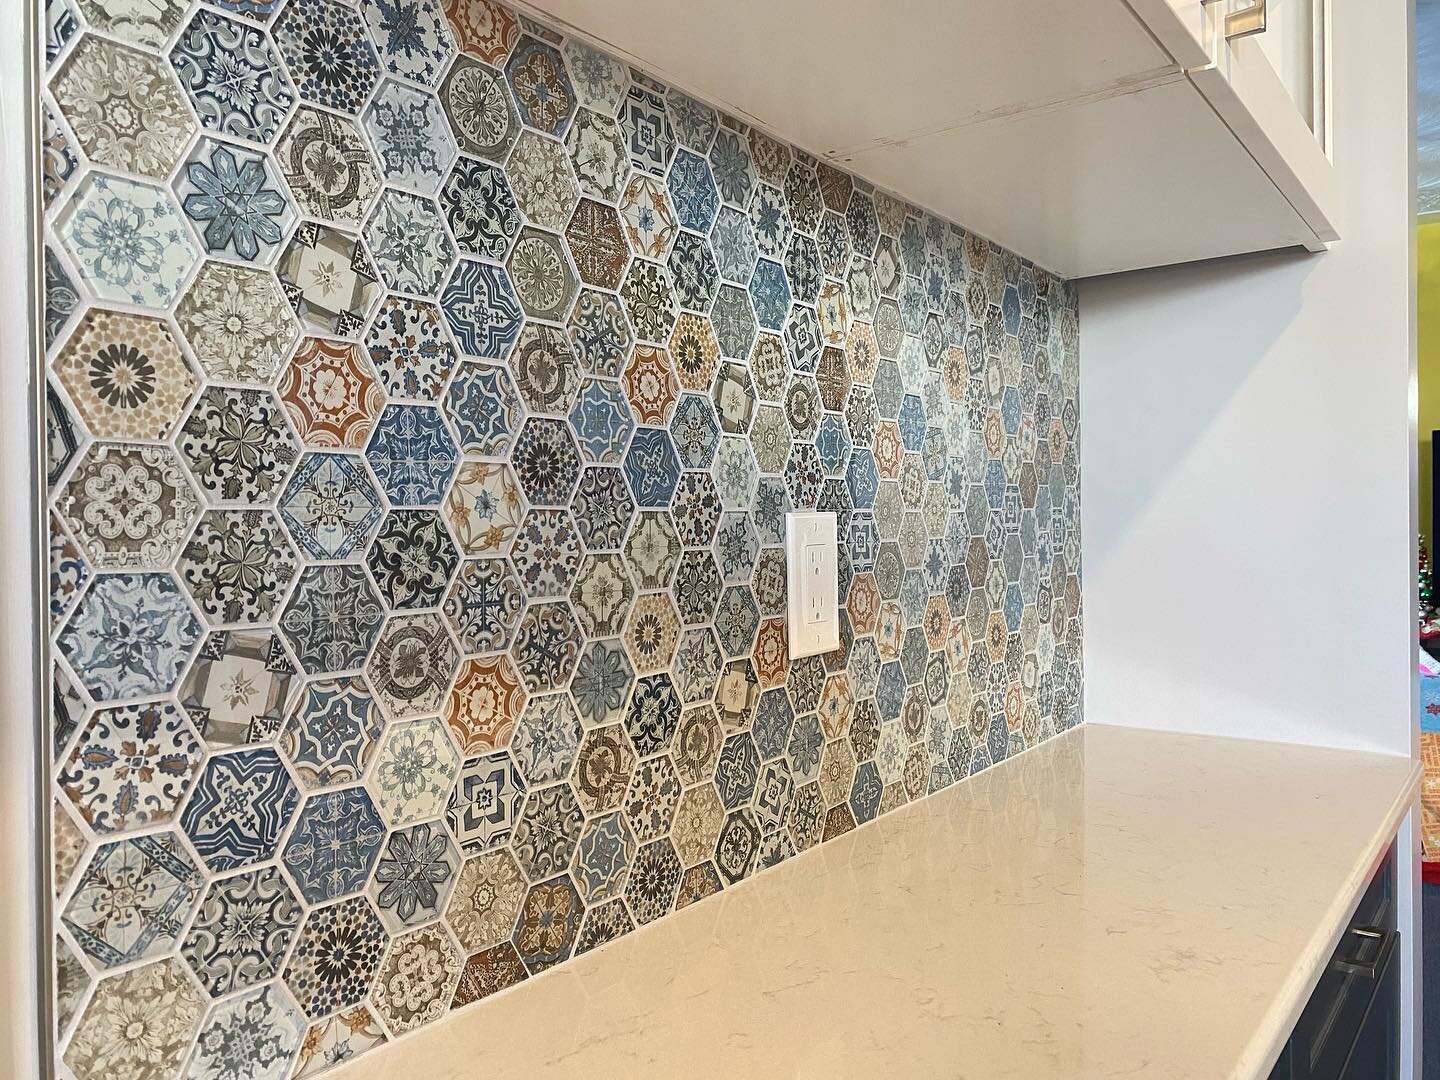 Glass Mosaic 

Thinking of renovating your space? We can help. 

📞 519-745-7564
📫 fred@jfsconstruction.ca
🖥 jfsconstruction.ca
📍Waterloo, Ontario
BBB Accredited  est. 1995

We take pride in every step. Check out our reviews from past clients that